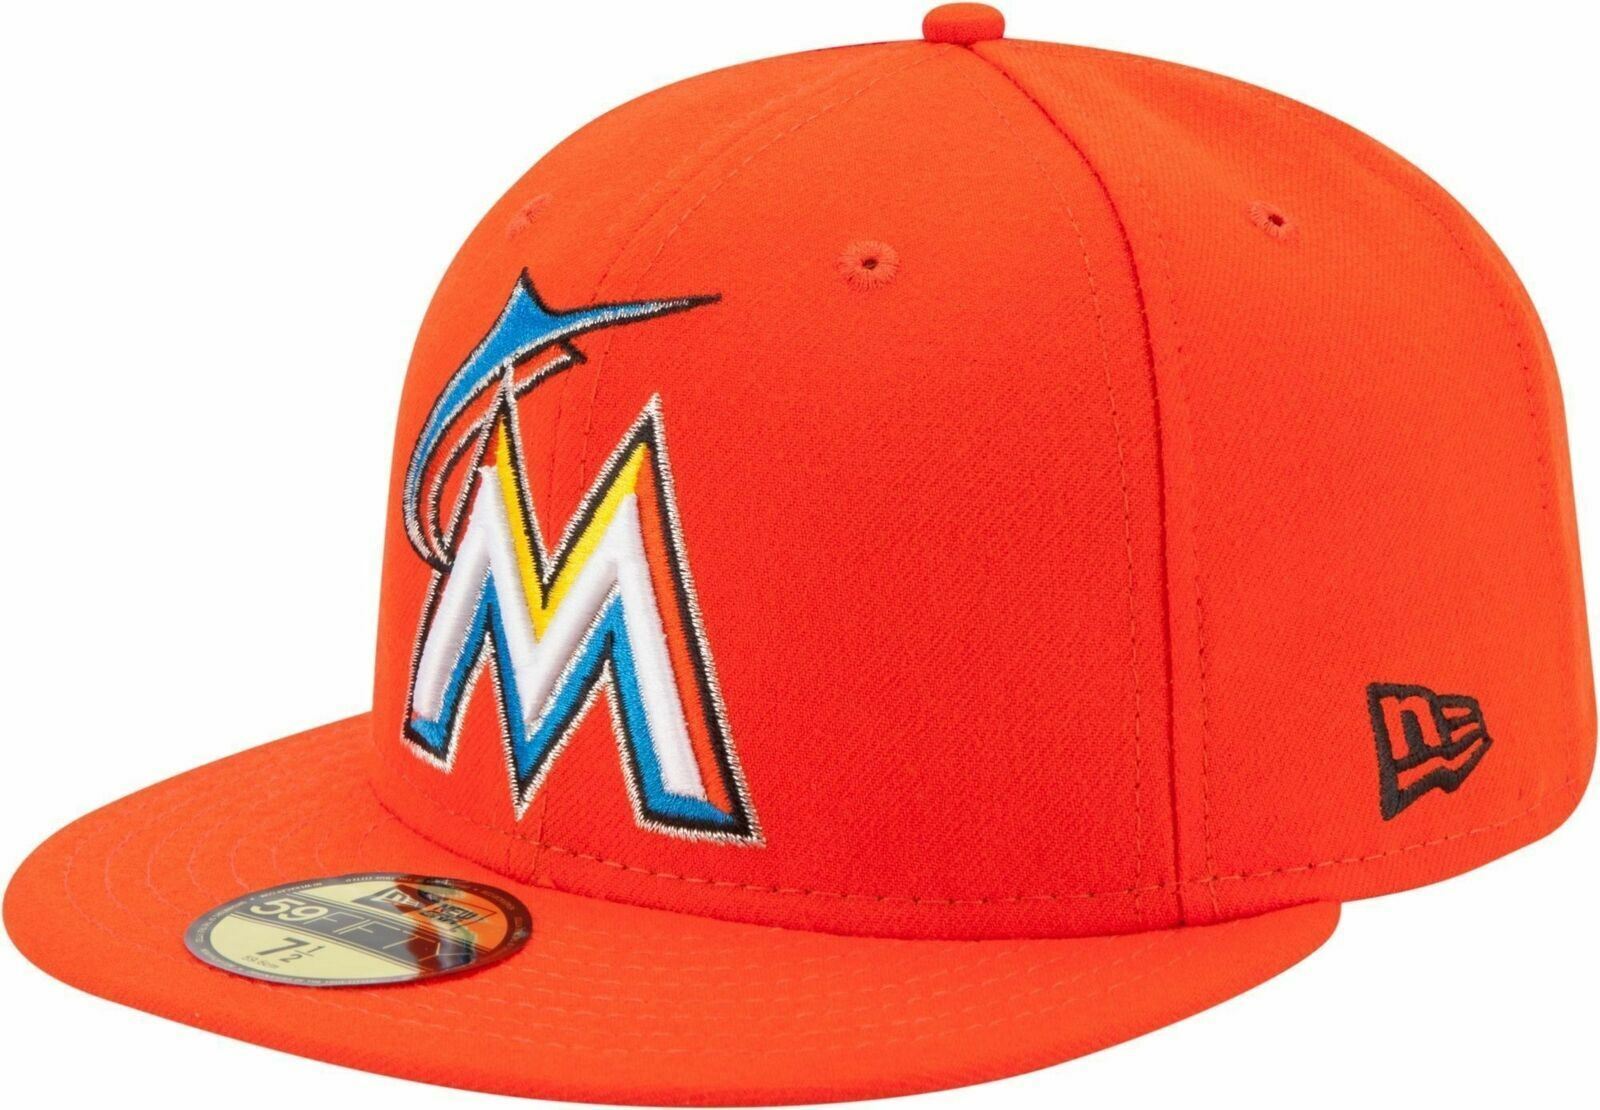 [70360936] Mens New Era MLB Authentic On Field 59FIFTY Fitted Cap Miami Marlins